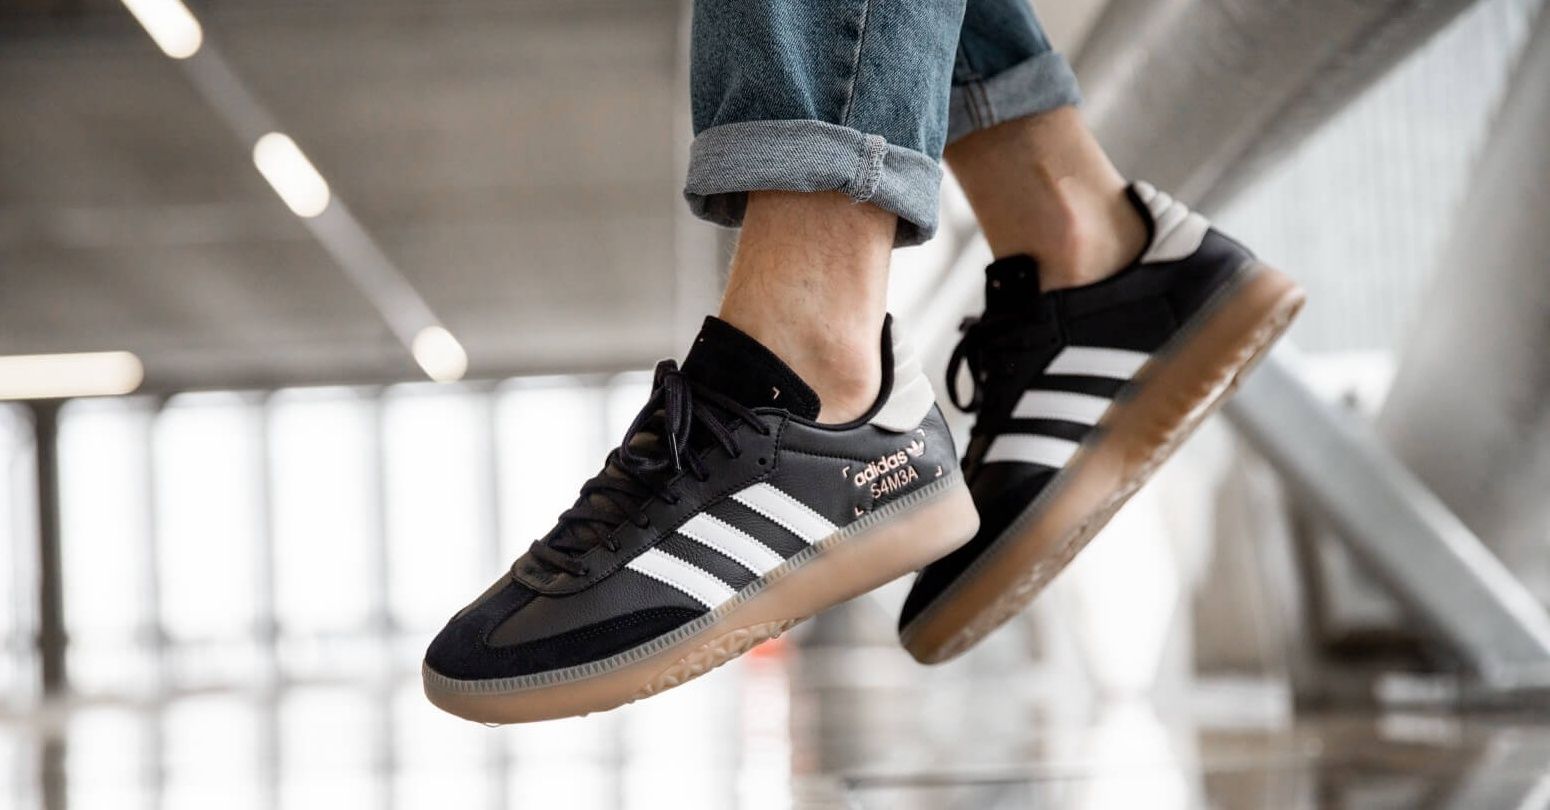 guide to Adidas Samba, the sneakers linking football and fashion